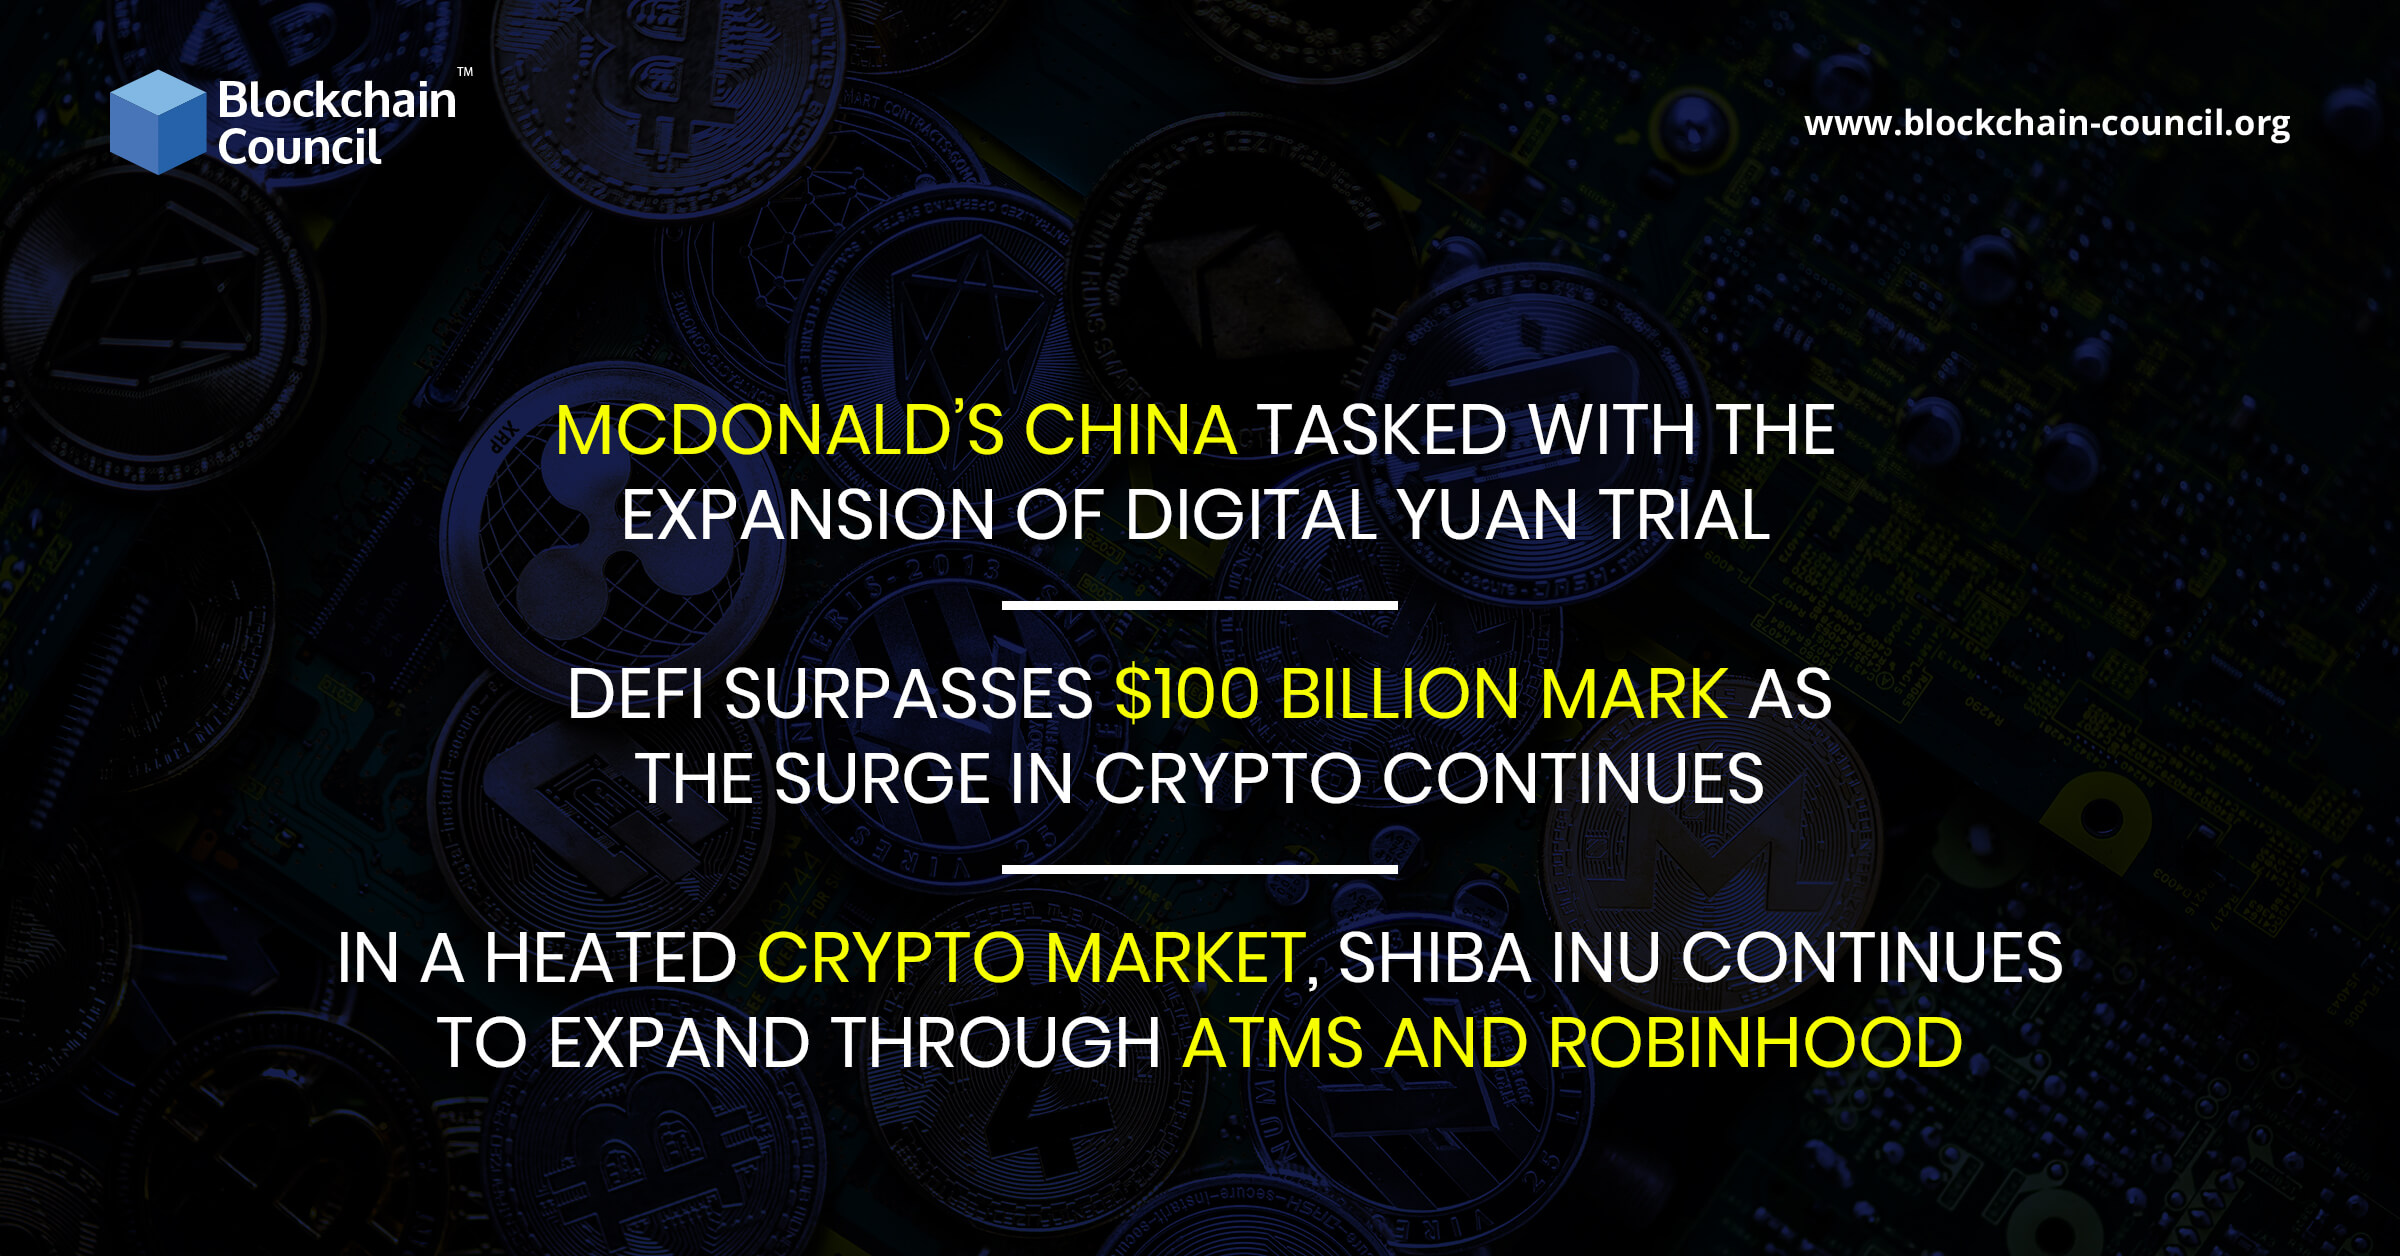 DeFi Surpasses $100 Billion Mark As The Surge In Crypto Continues 3 combo